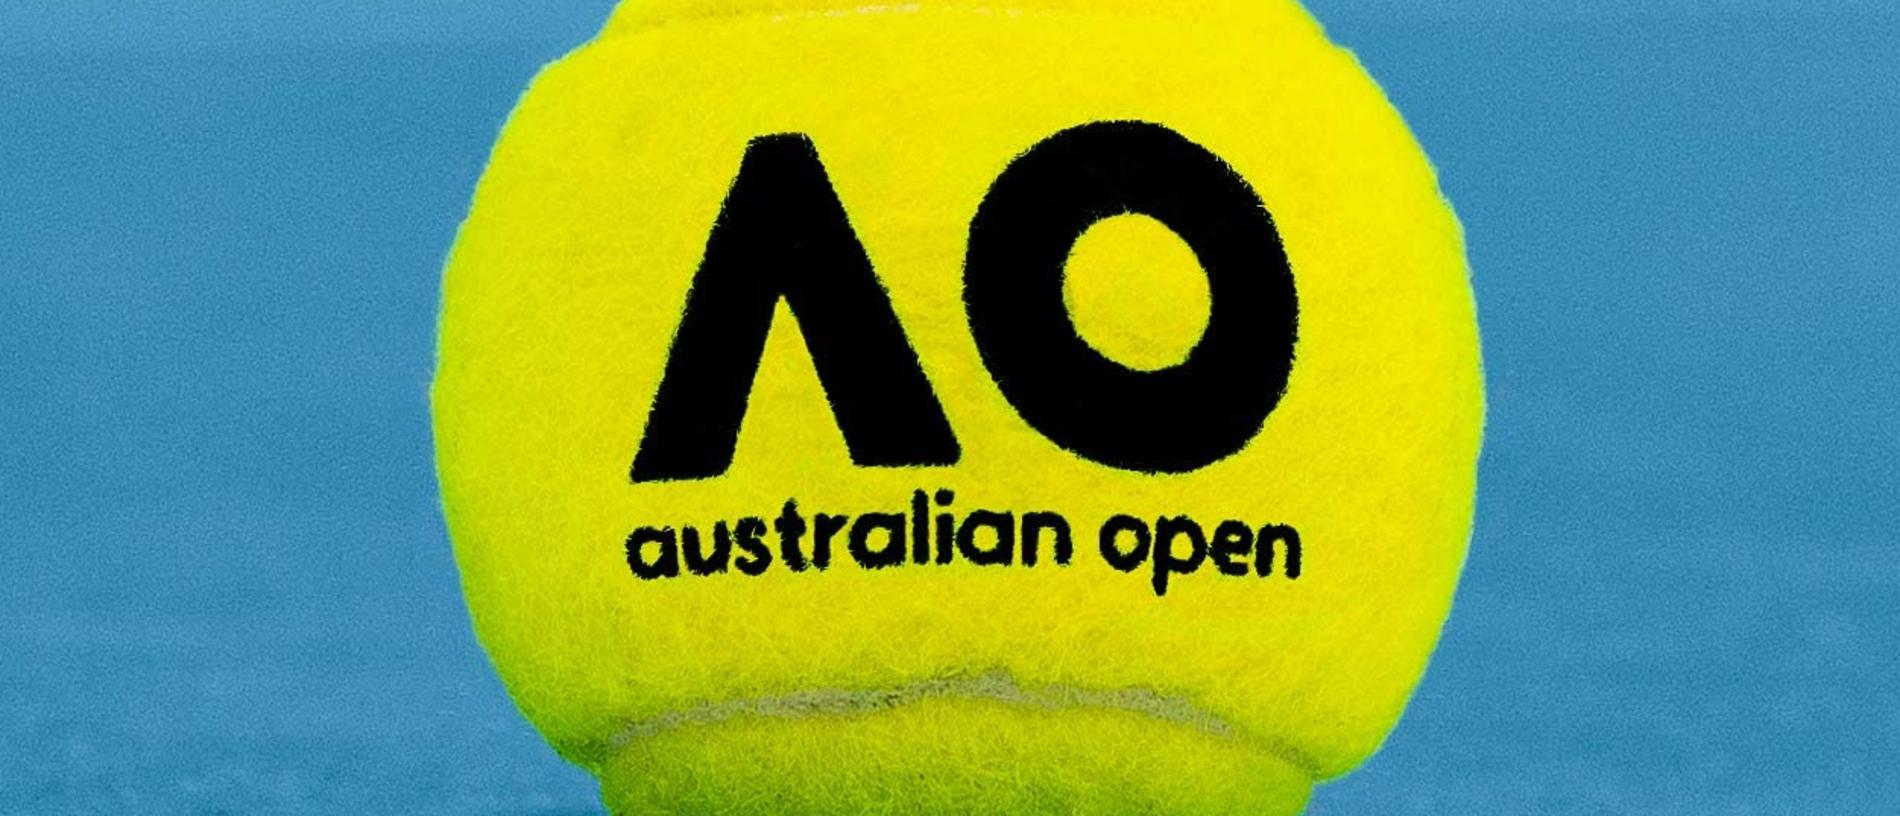 Australian Open 2021 ultimate guide | Draw, schedule, dates, how to watch on TV, prize money, latest news